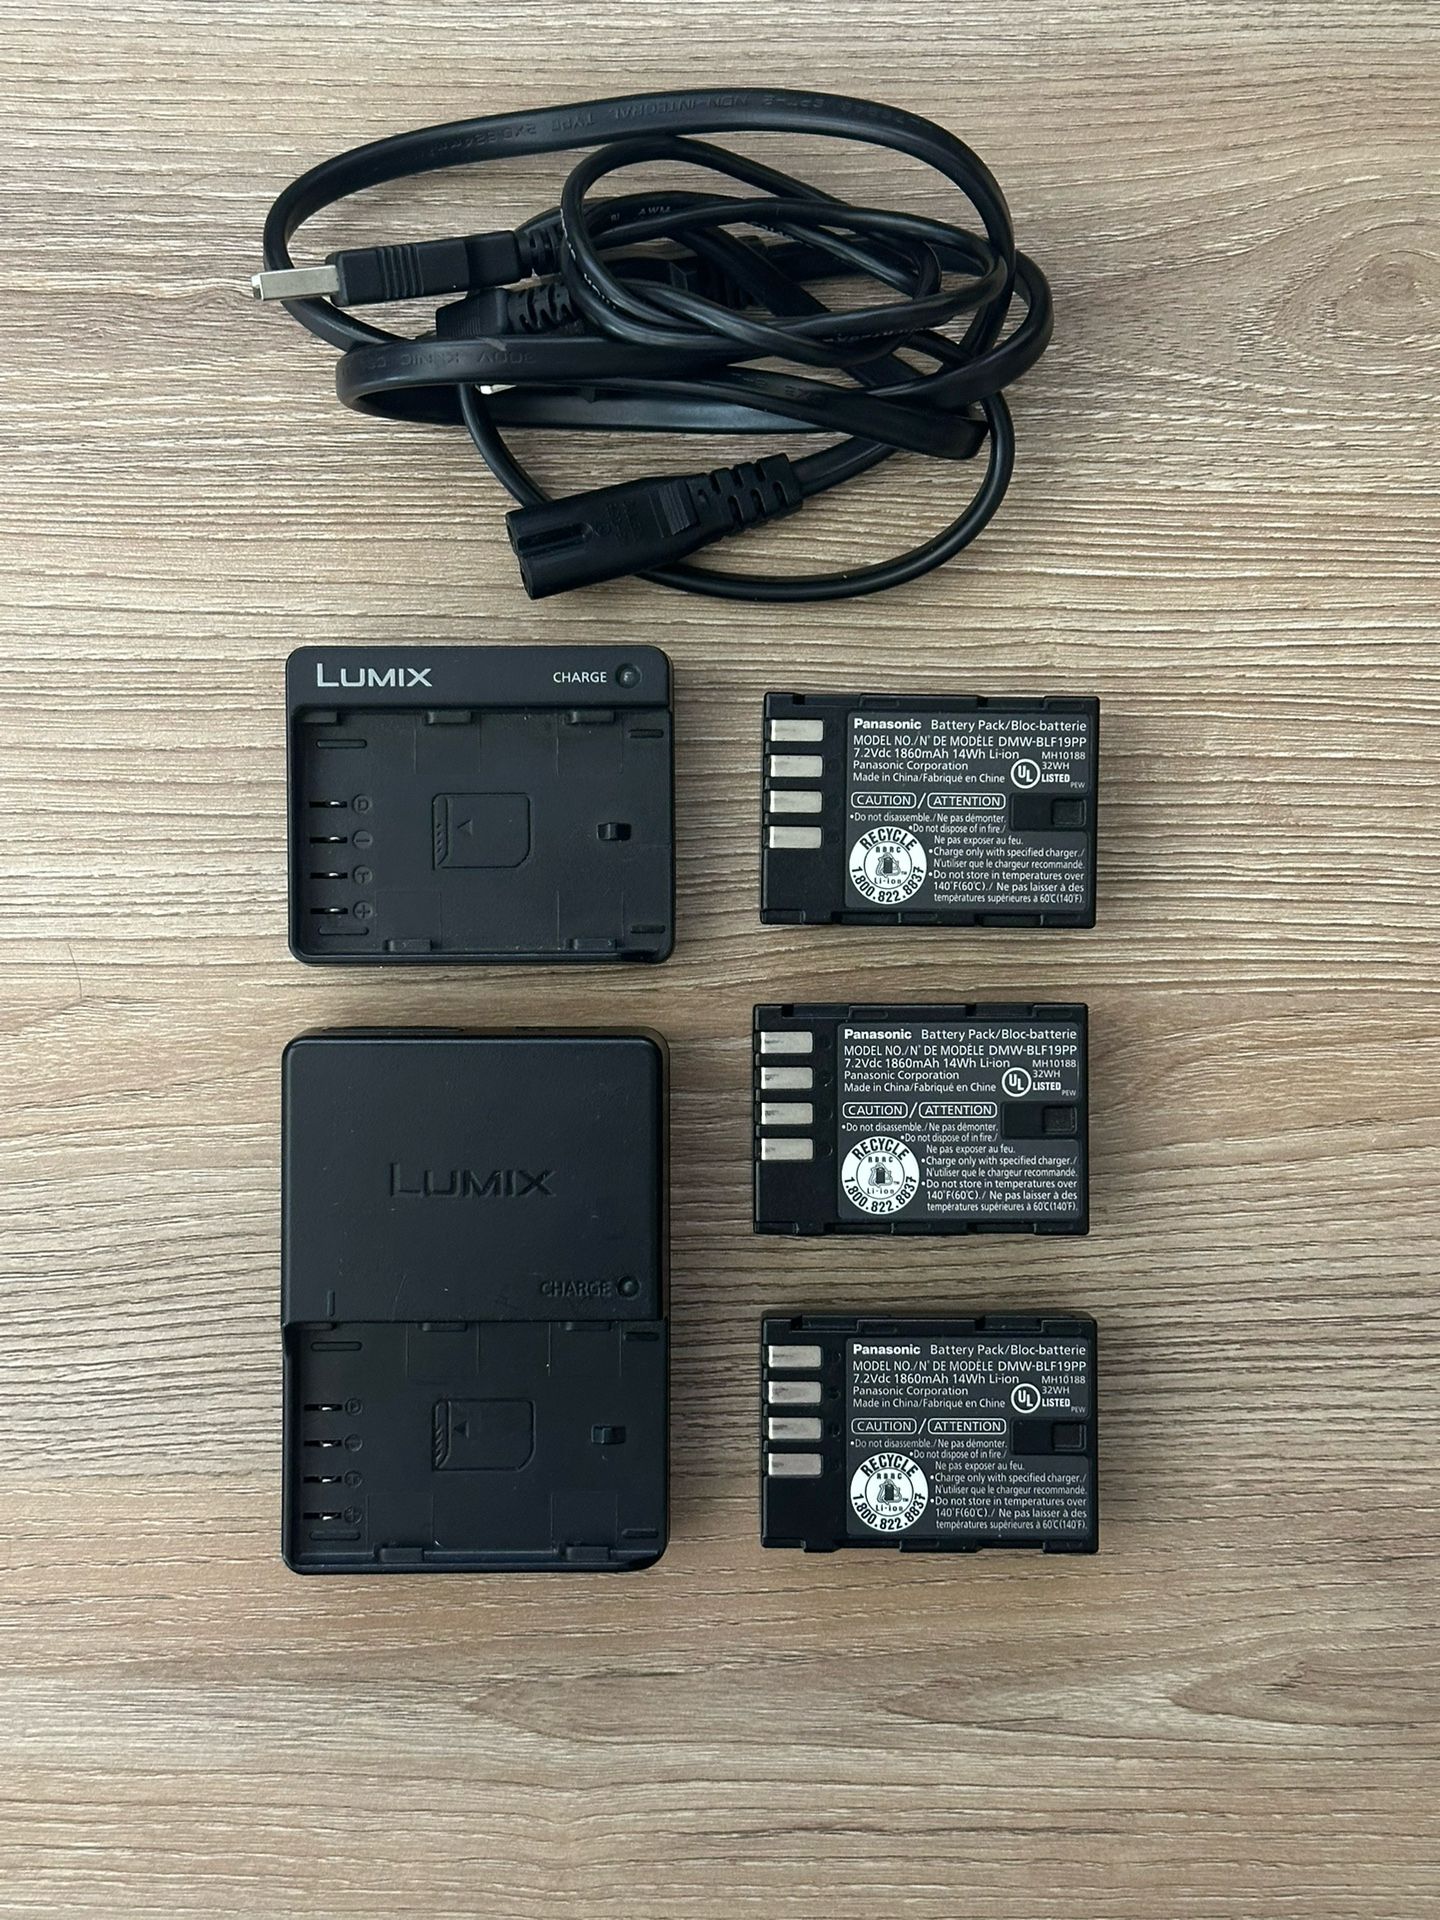 3 ORIGINAL Panasonic Batteries (DMW-BLF19PP) AND 2 Panasonic Chargers with Charging Cords